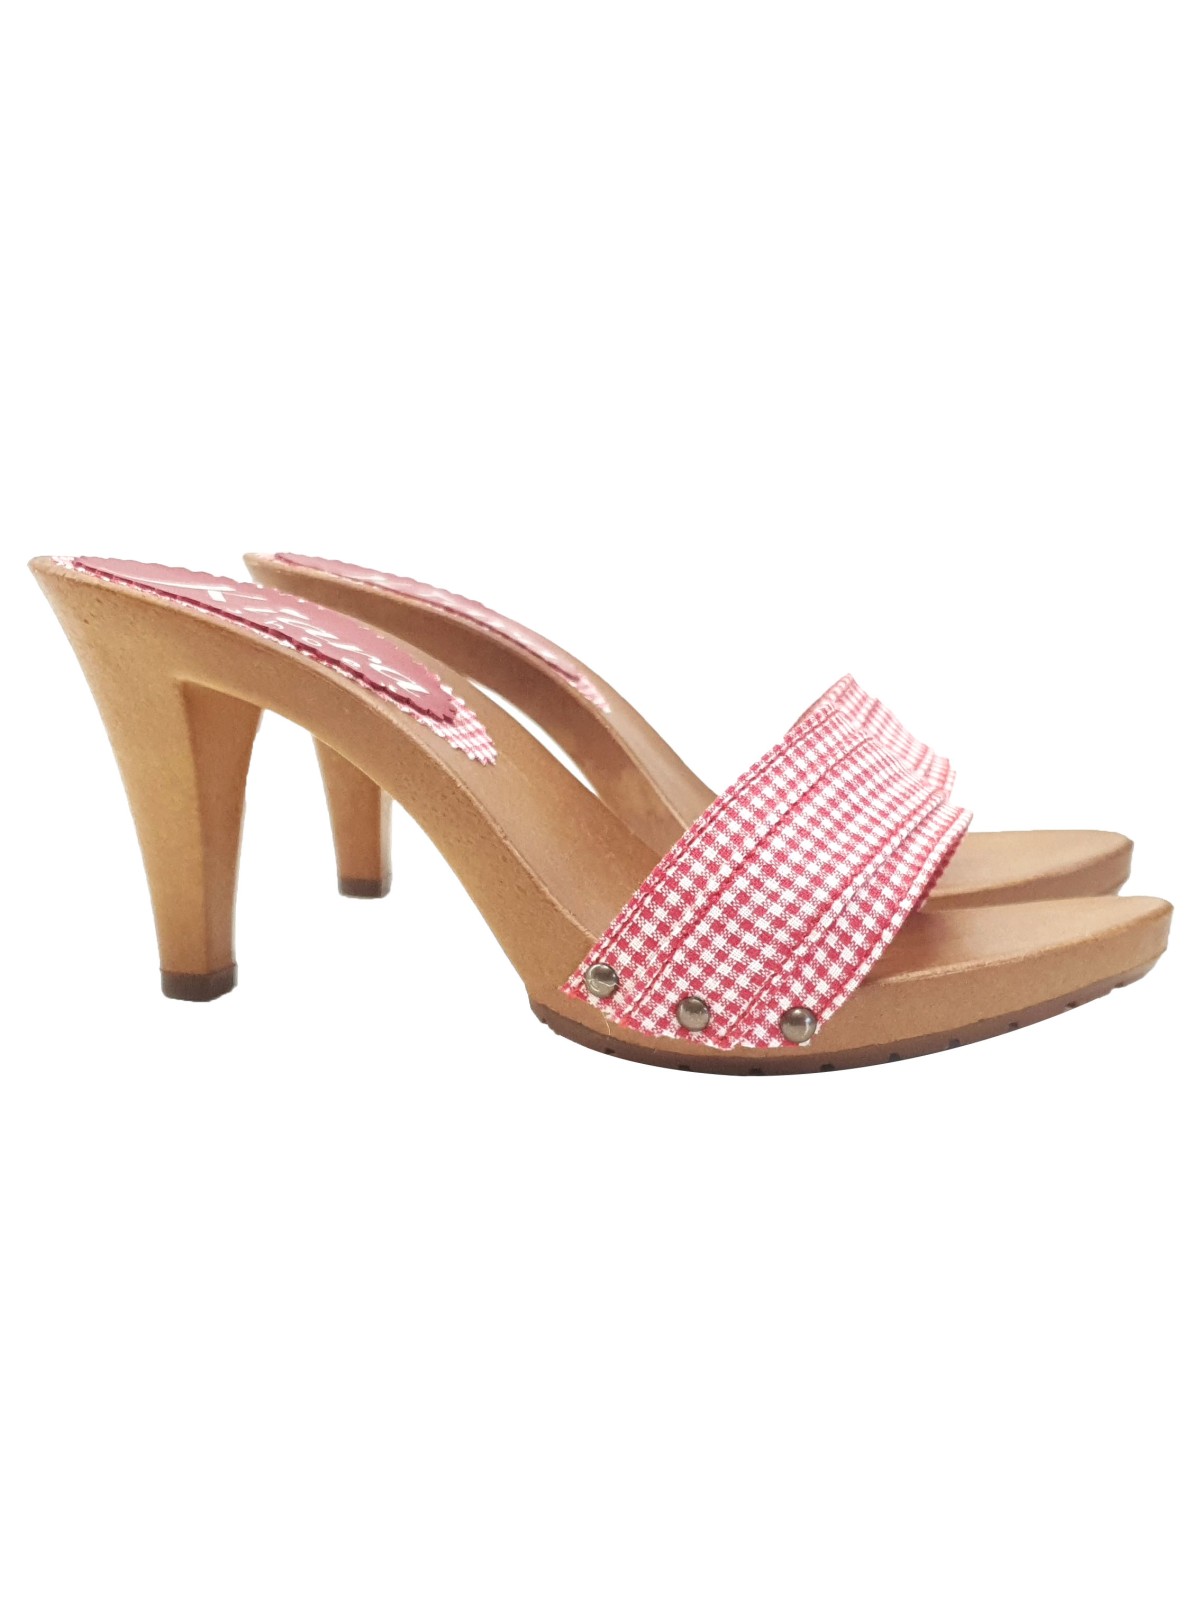 RED CHECKED CLOGS WITH 9 CM HEEL